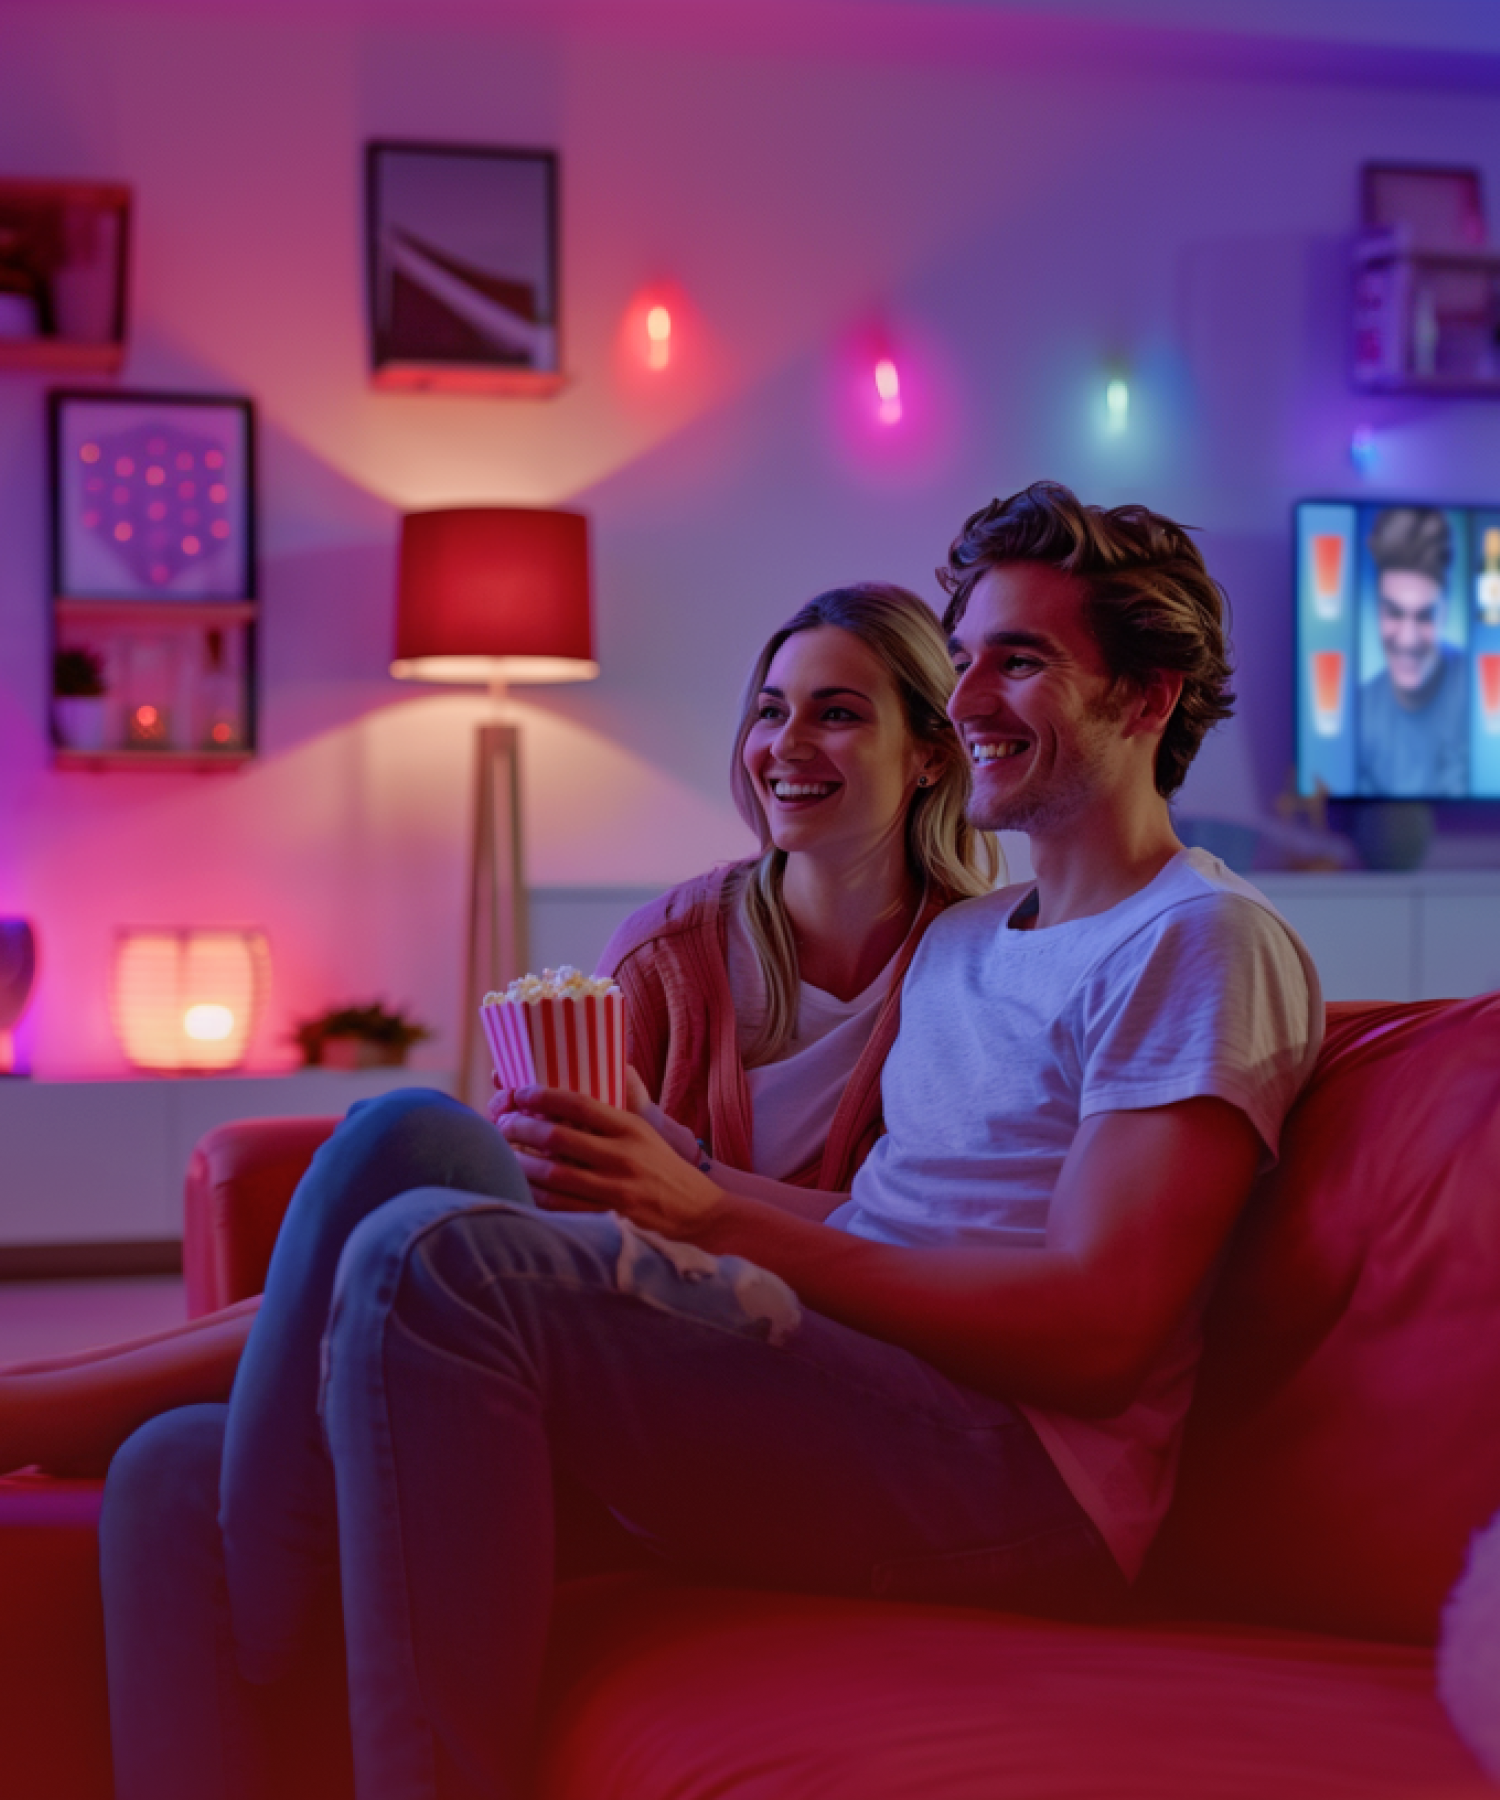 Cozy Sengled Lights - Enhancing Your Home Theater Experience